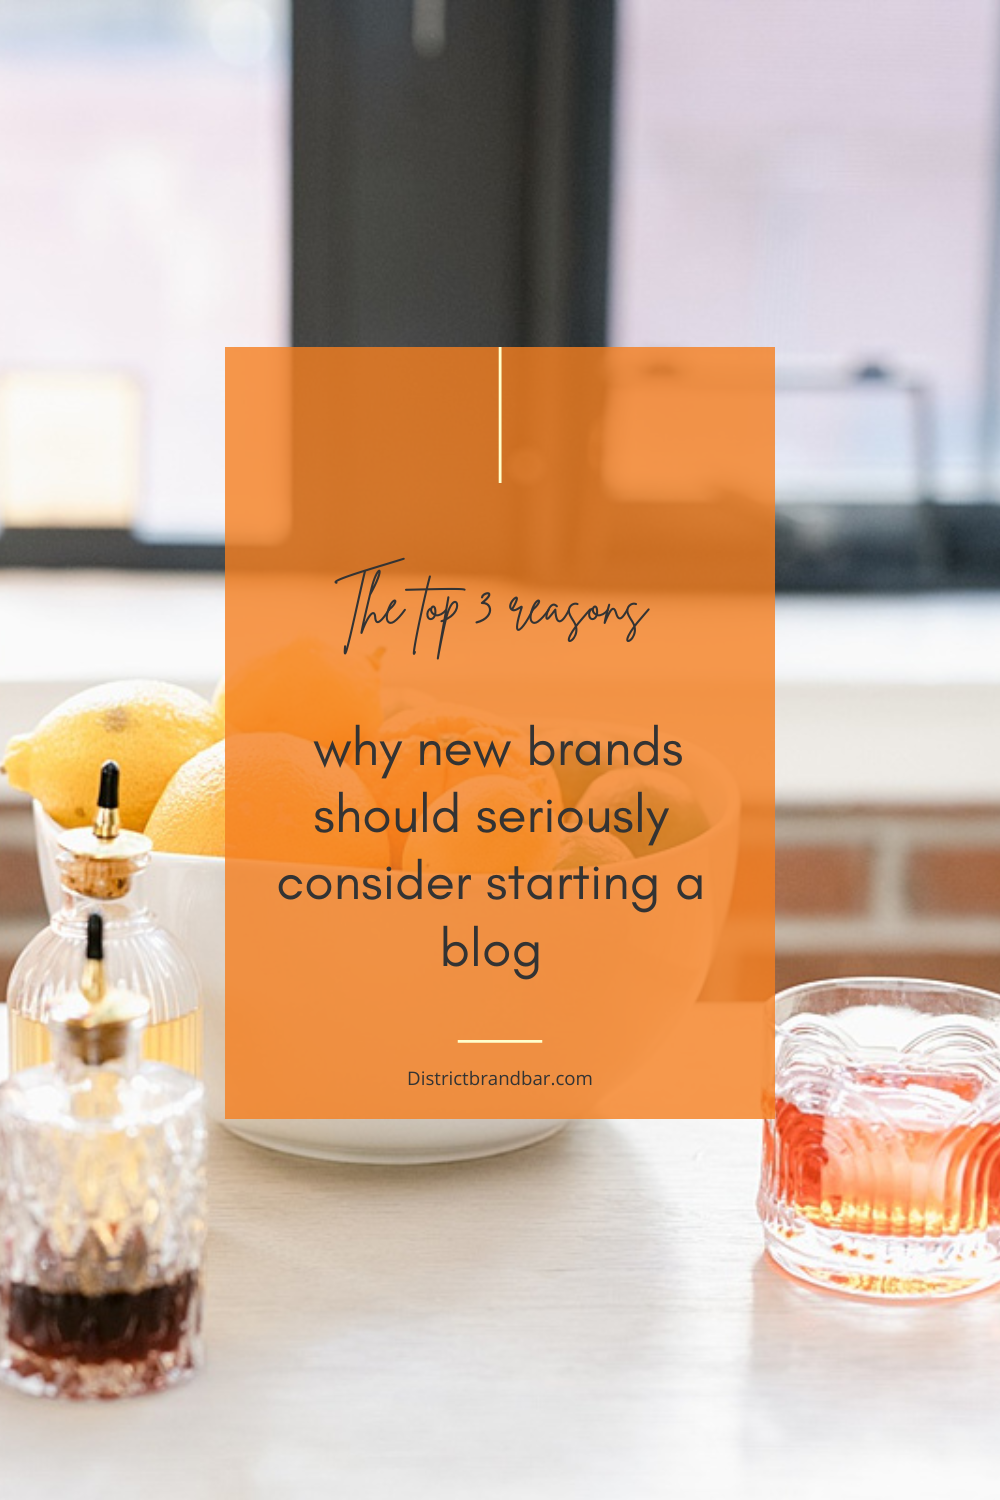 3 Reasons New Brands Should Consider Starting a Blog